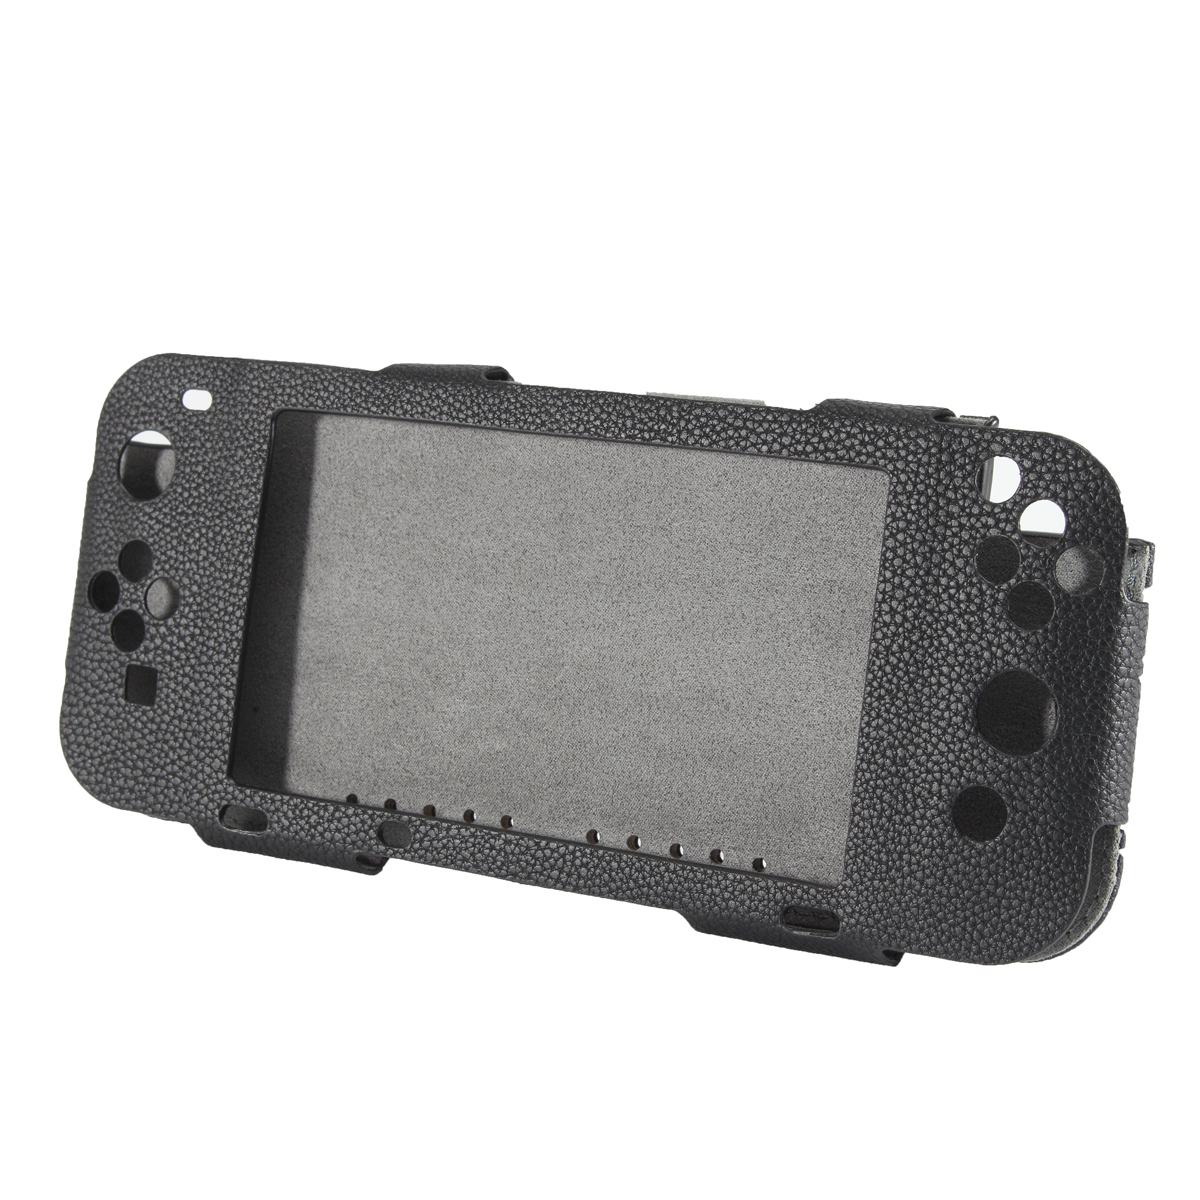 Leather-Protective-Case-Cover-Protecor-for-Nintendo-Switch-Game-Console-1540488-4